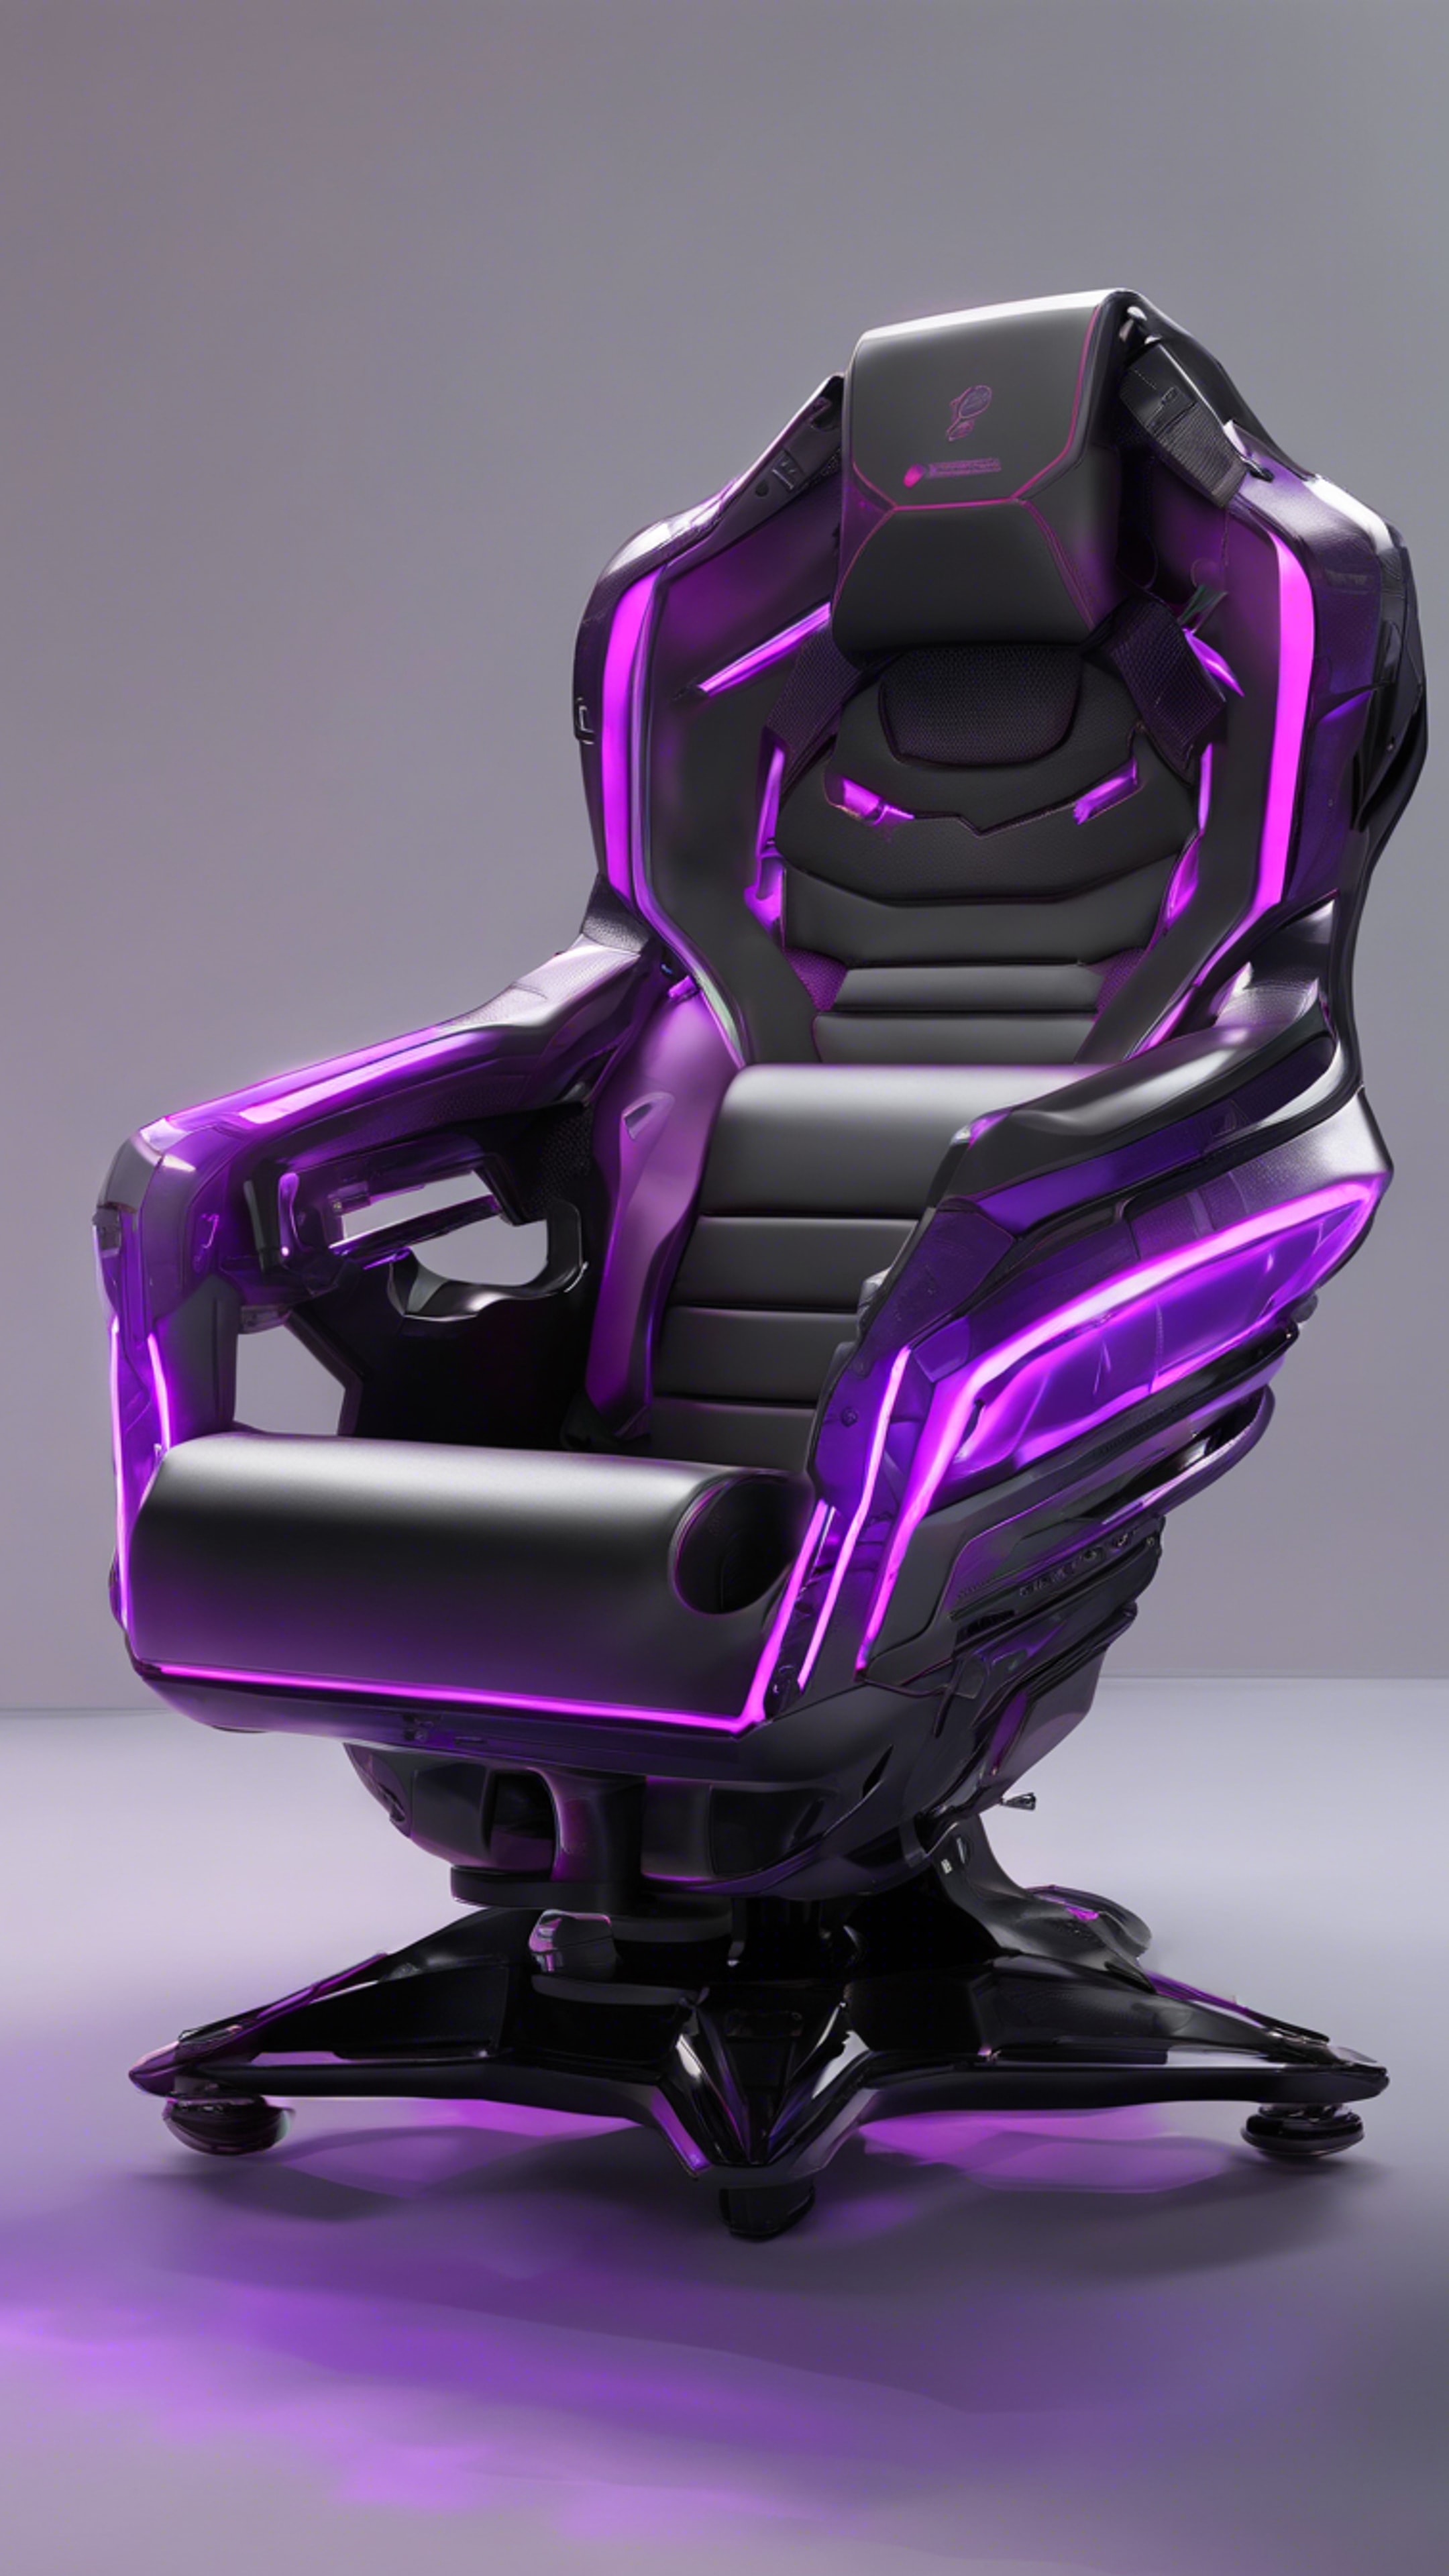 A futuristic gaming chair, jet black with neon purple accents, situated in a high-tech gaming station. Fondo de pantalla[77c4183ef08040e08e97]